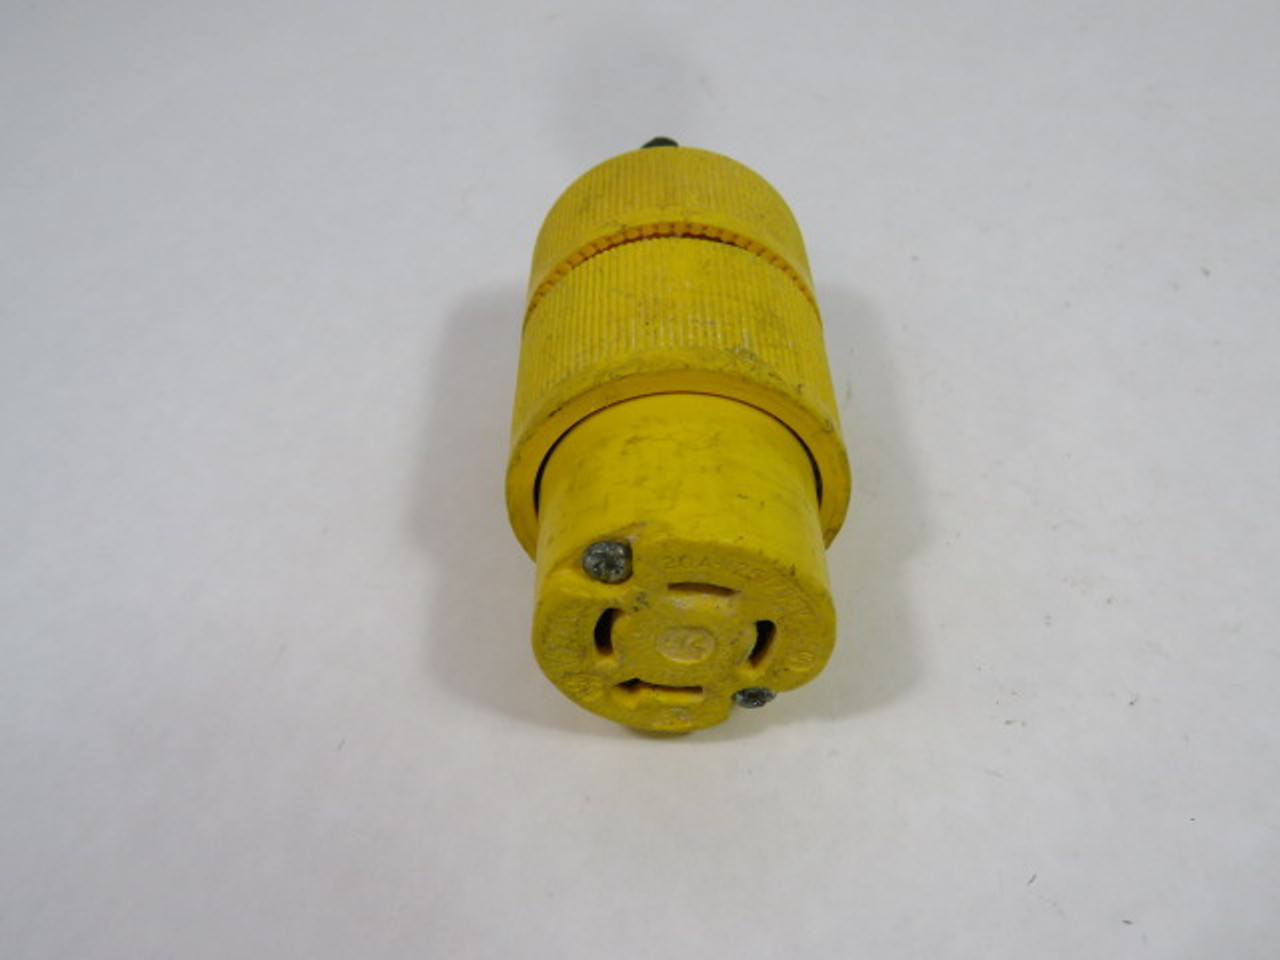 General Electric GLD7313 Yellow Industrial Connector 20A 125/250V 3W 3P USED